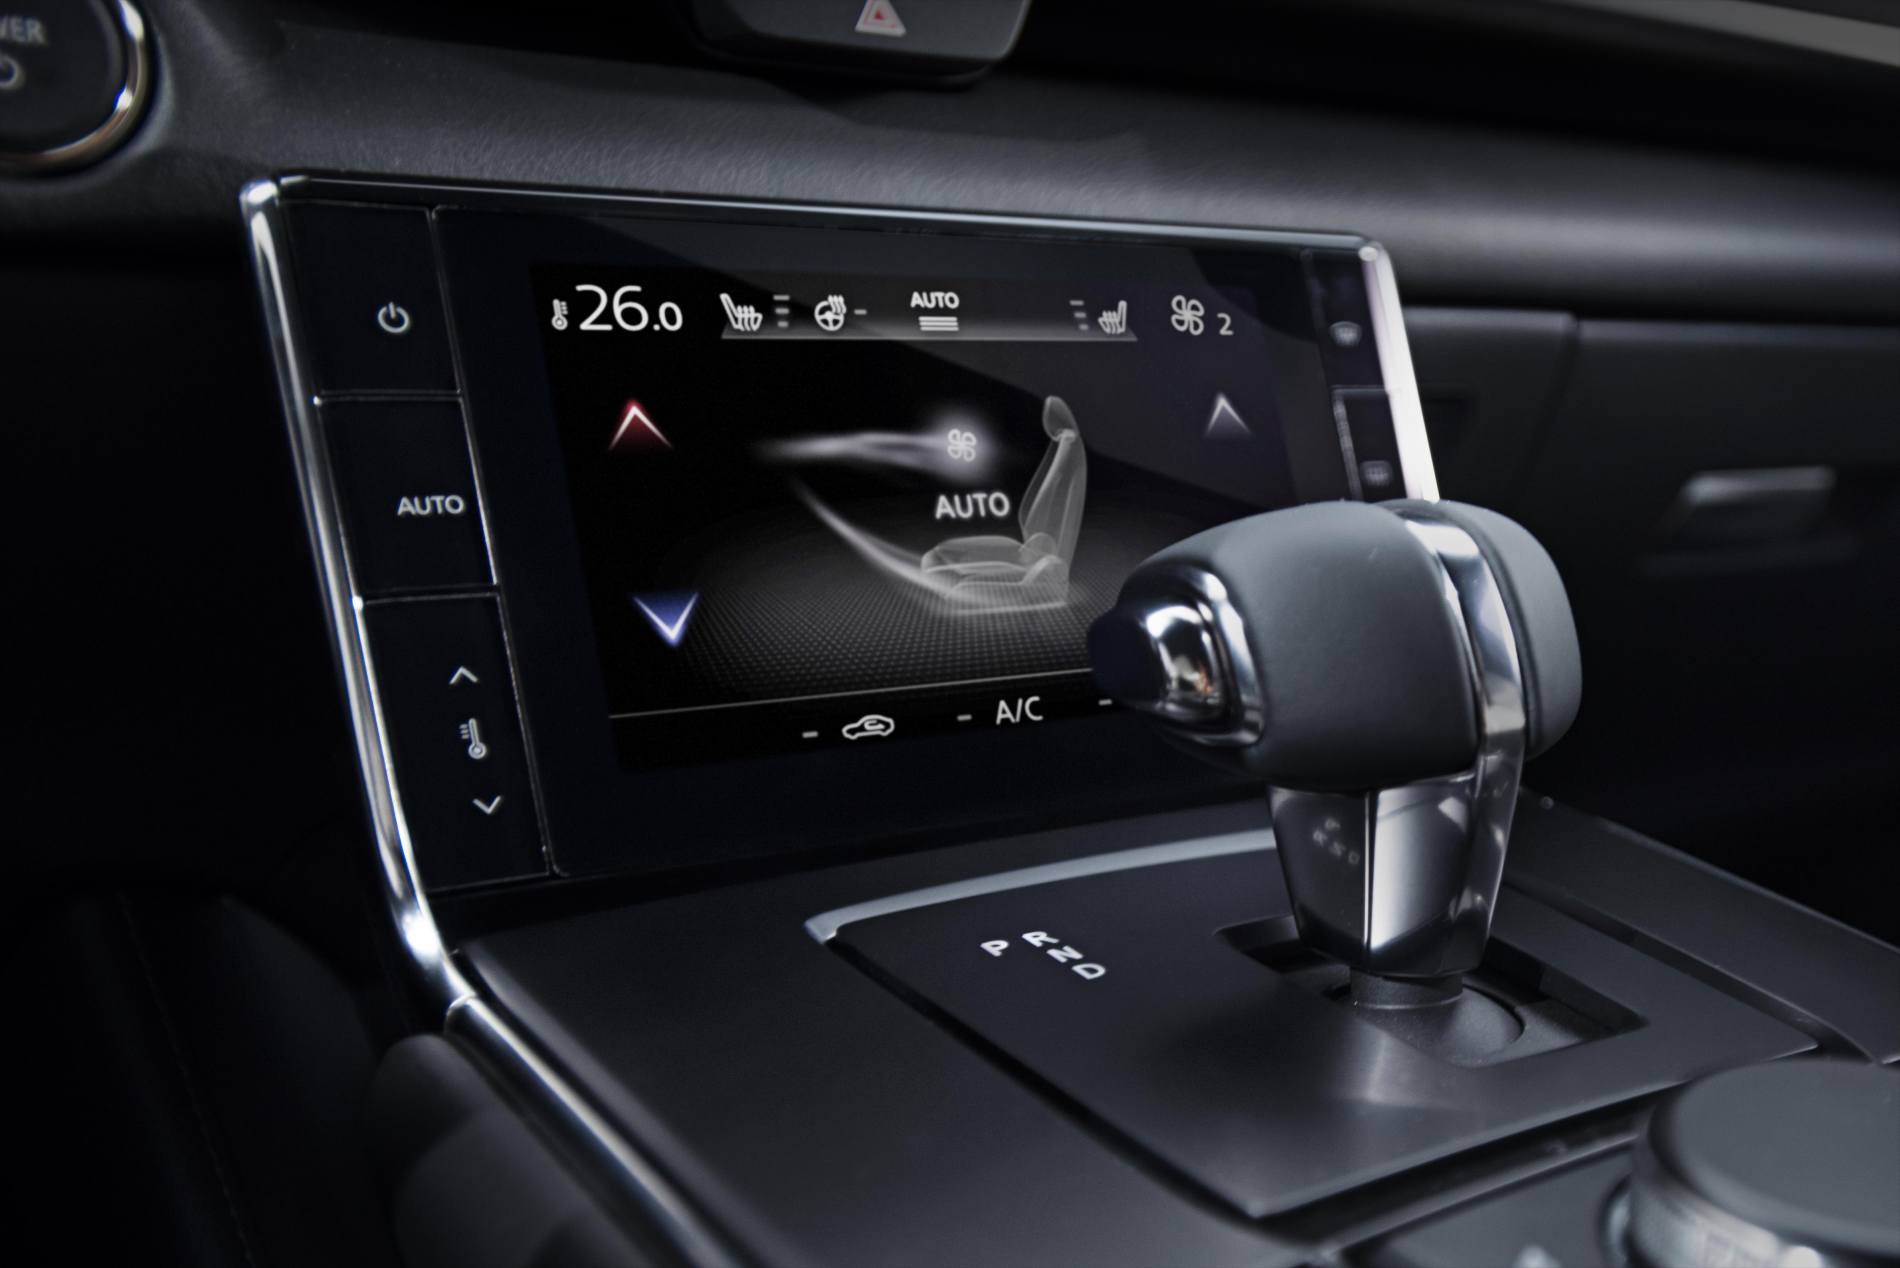 MAZDA-MX-30_Detail_7-inch-touchscreen-display_EU-specification_22_hires